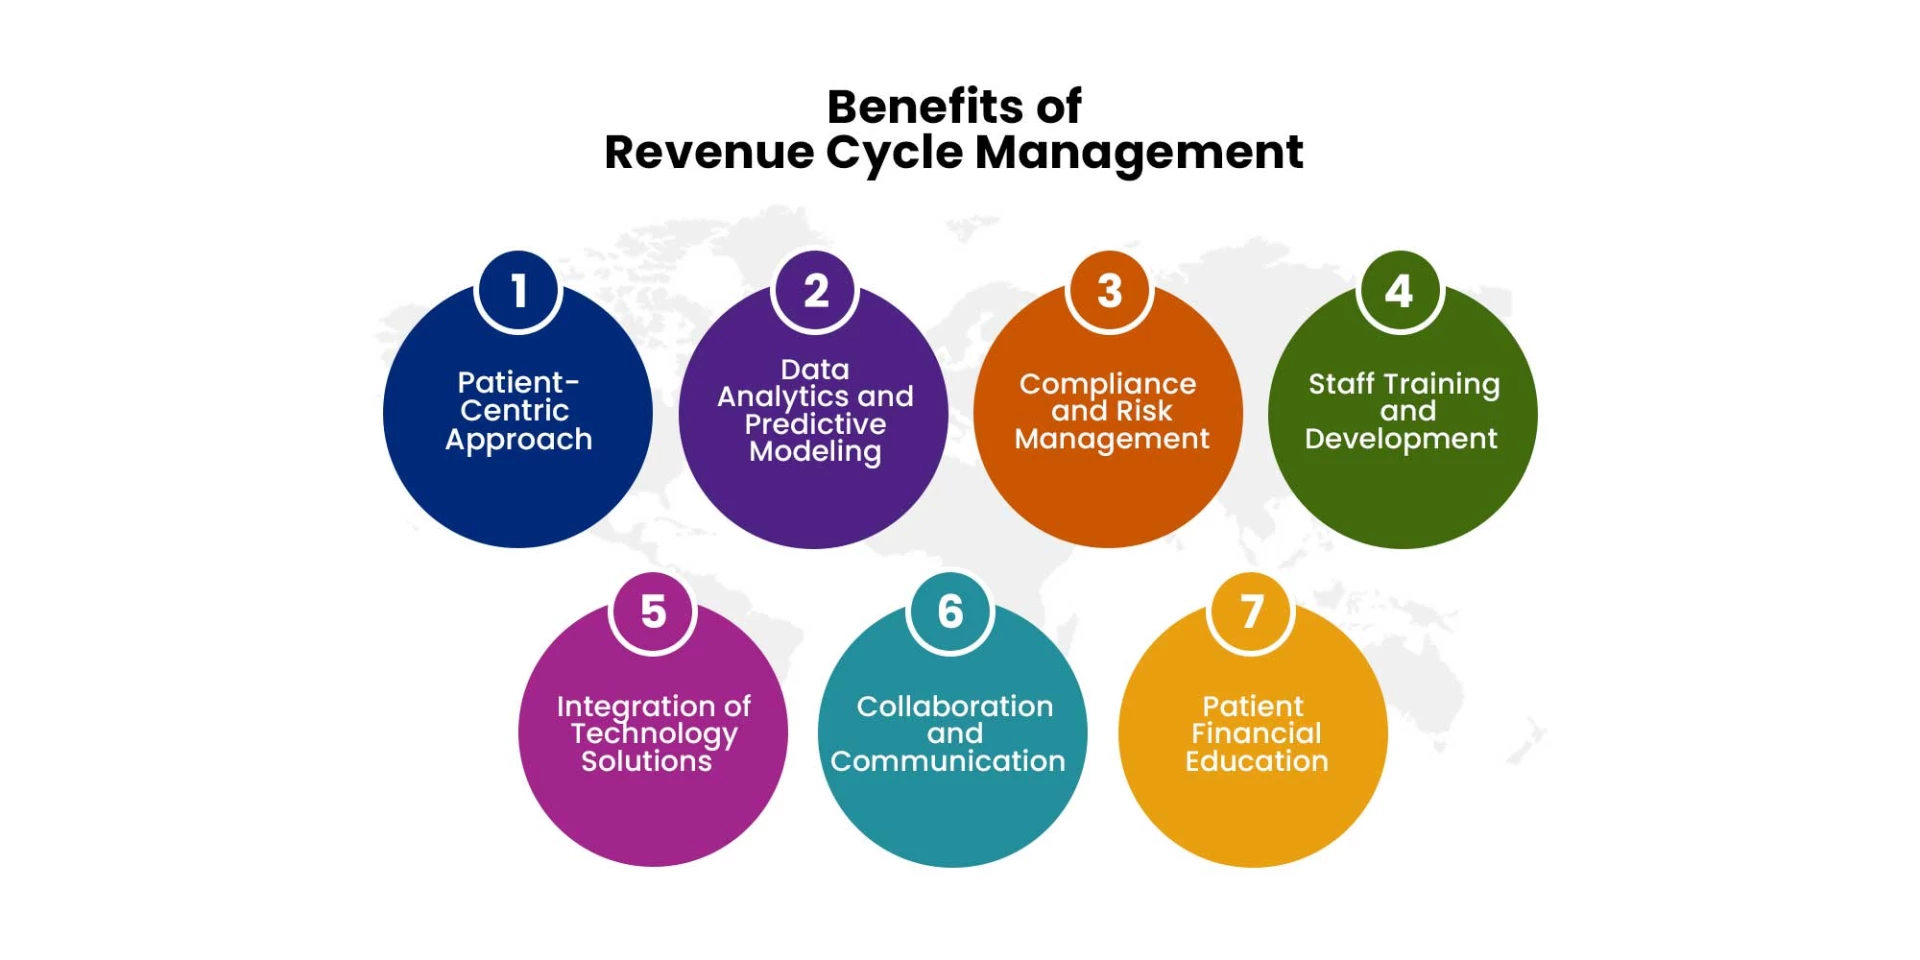 Benefits of revenue cycle management 